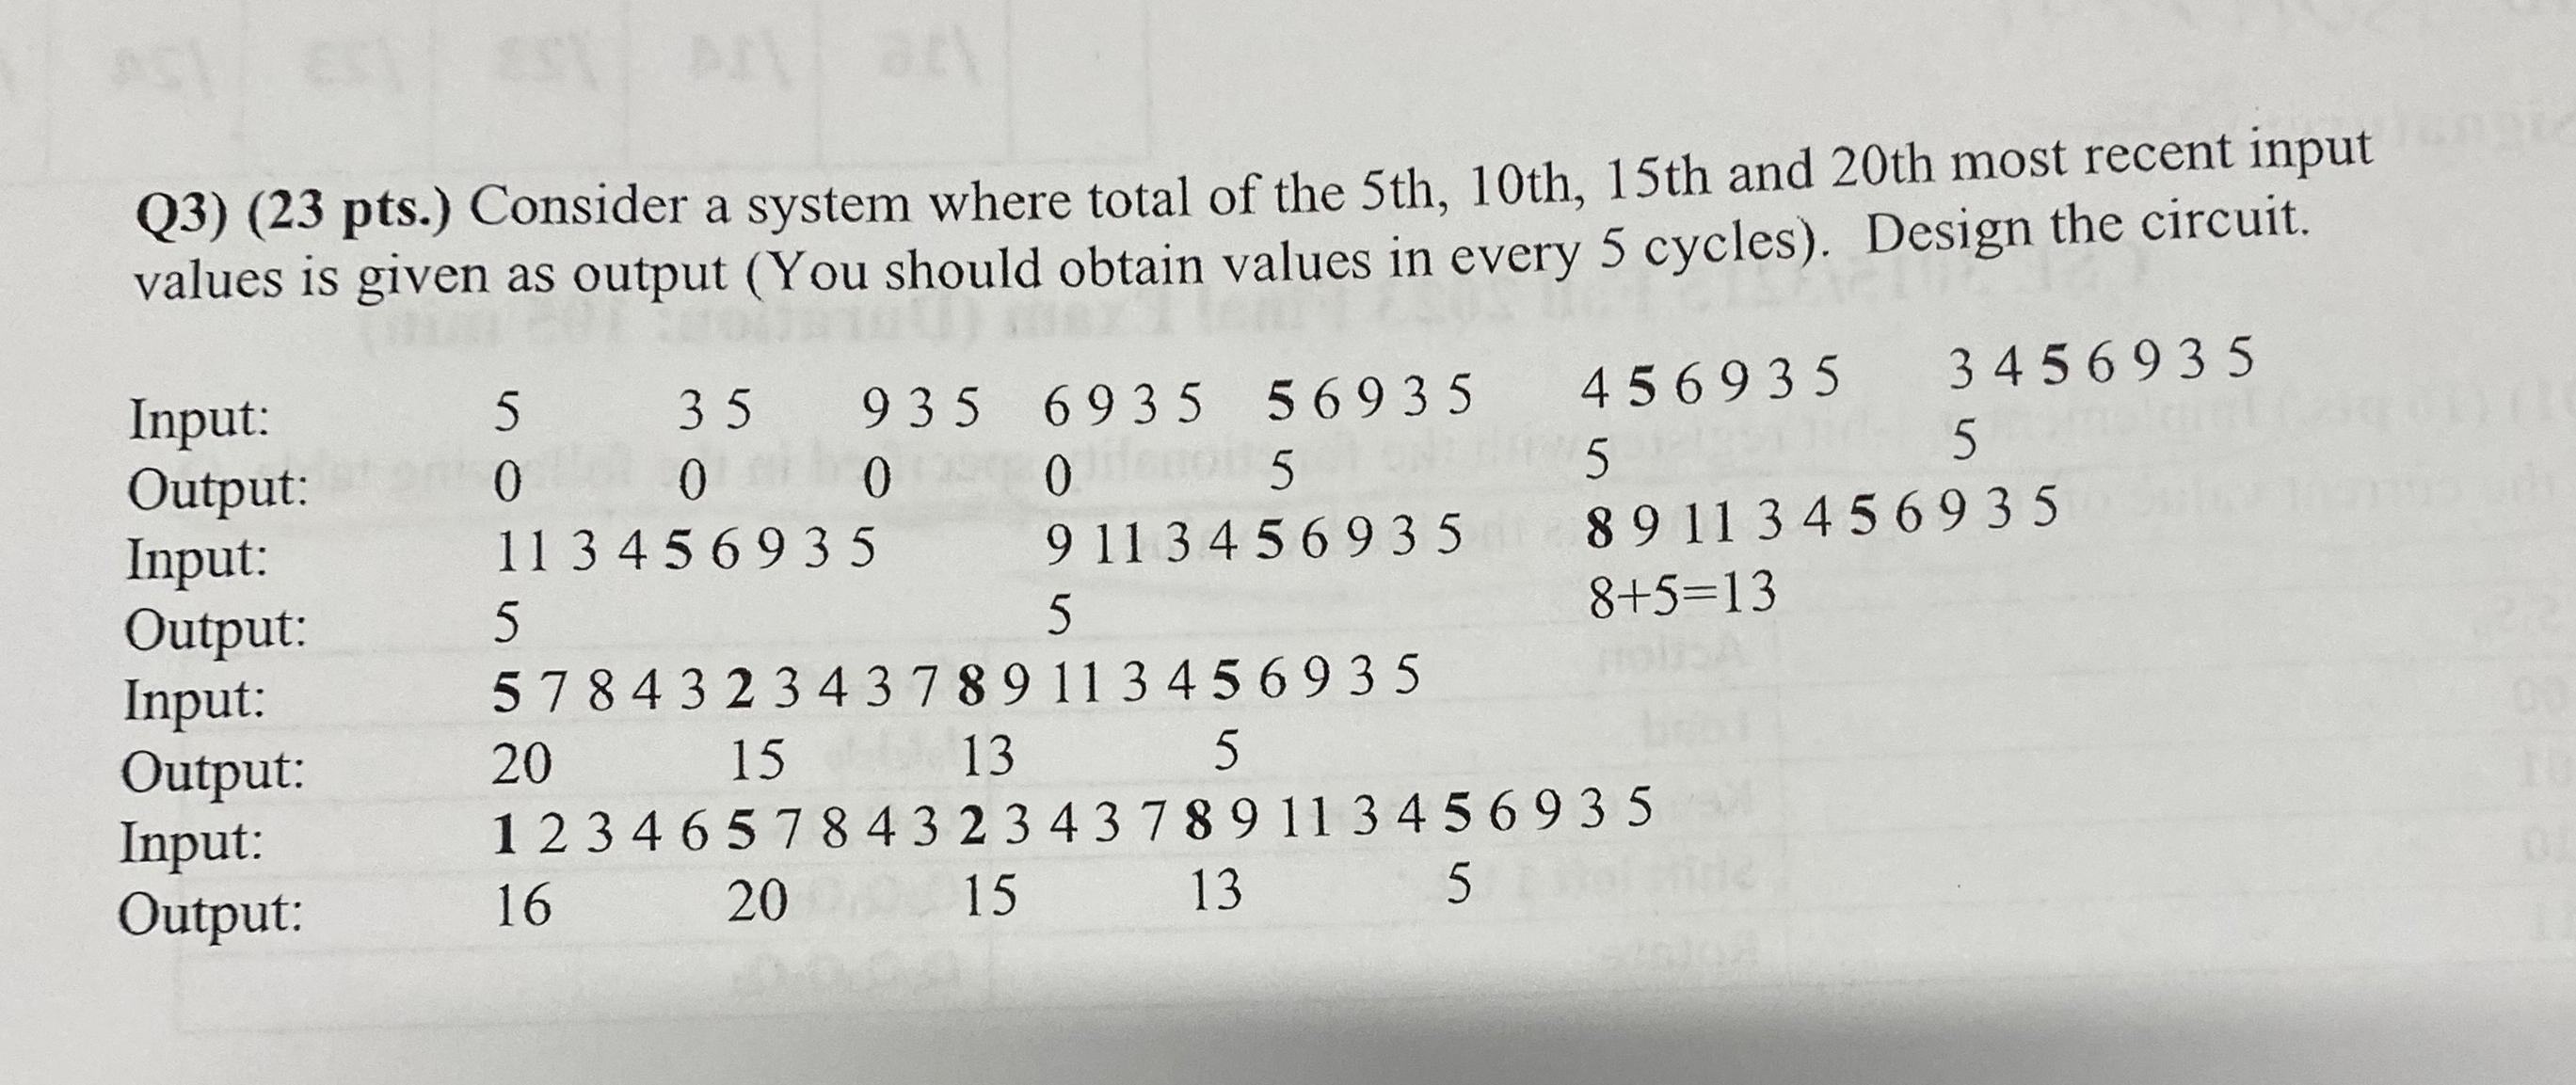 Q3) (23 pts.) Consider a system where total of the 5th, 10th, 15th and 20th most recent input values is given